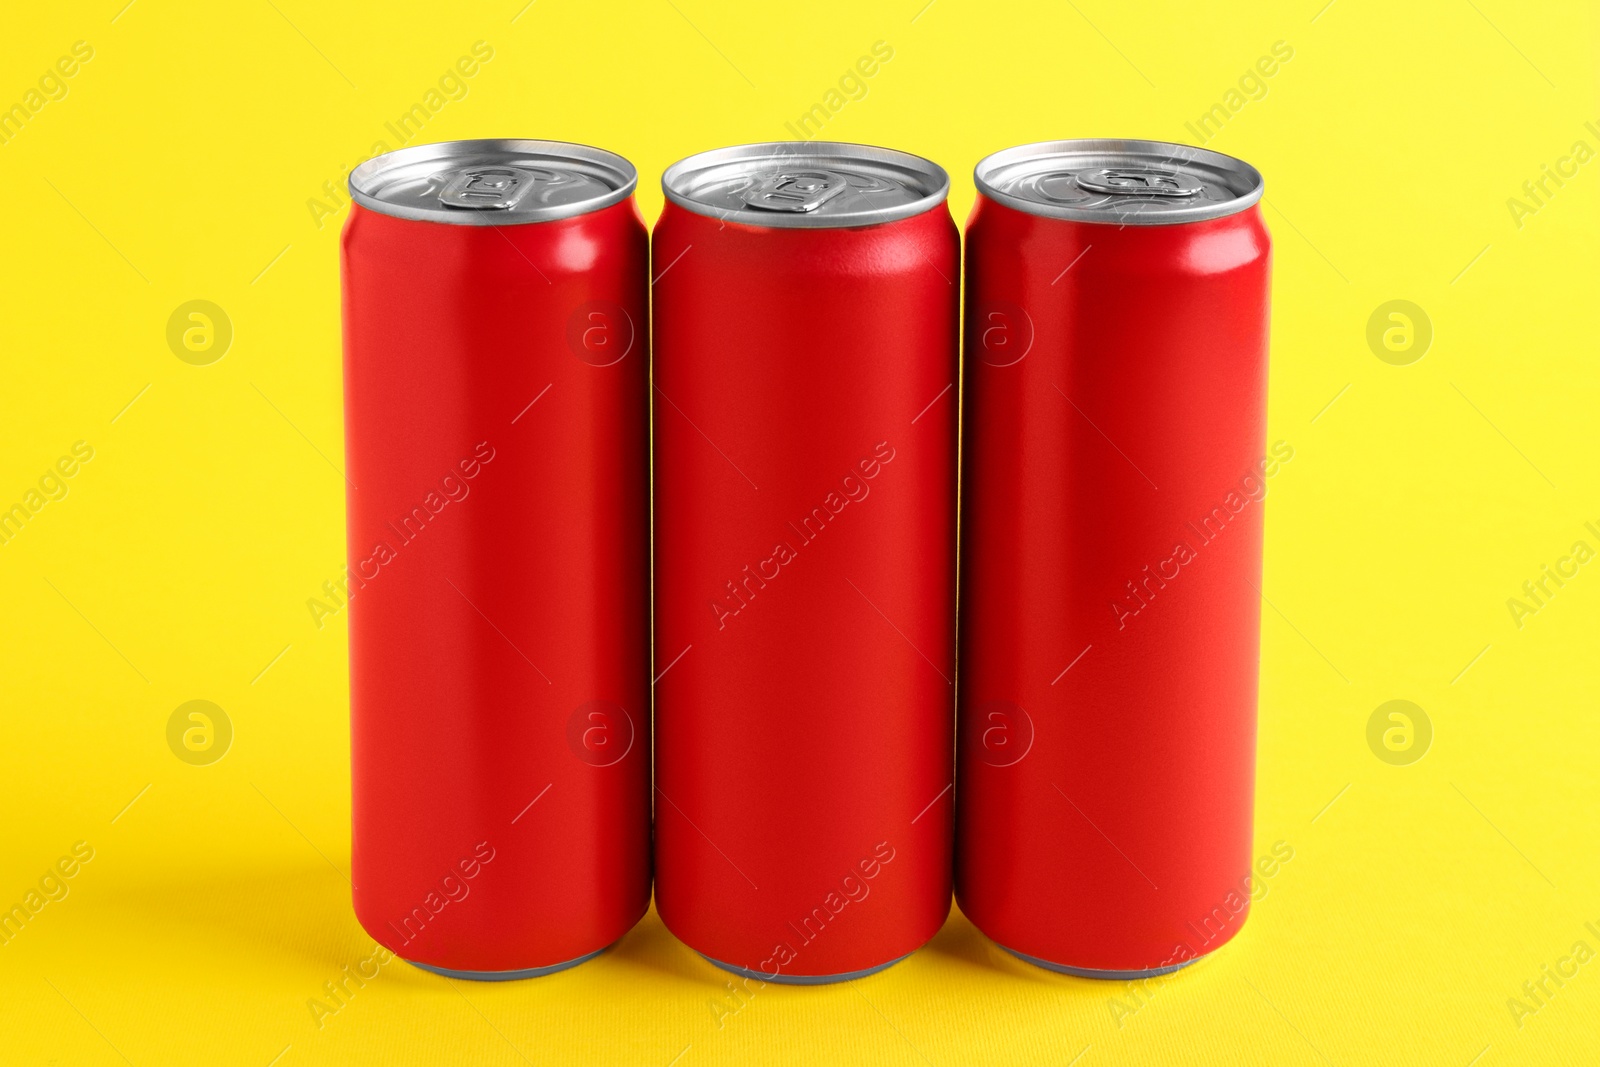 Photo of Energy drinks in red cans on yellow background